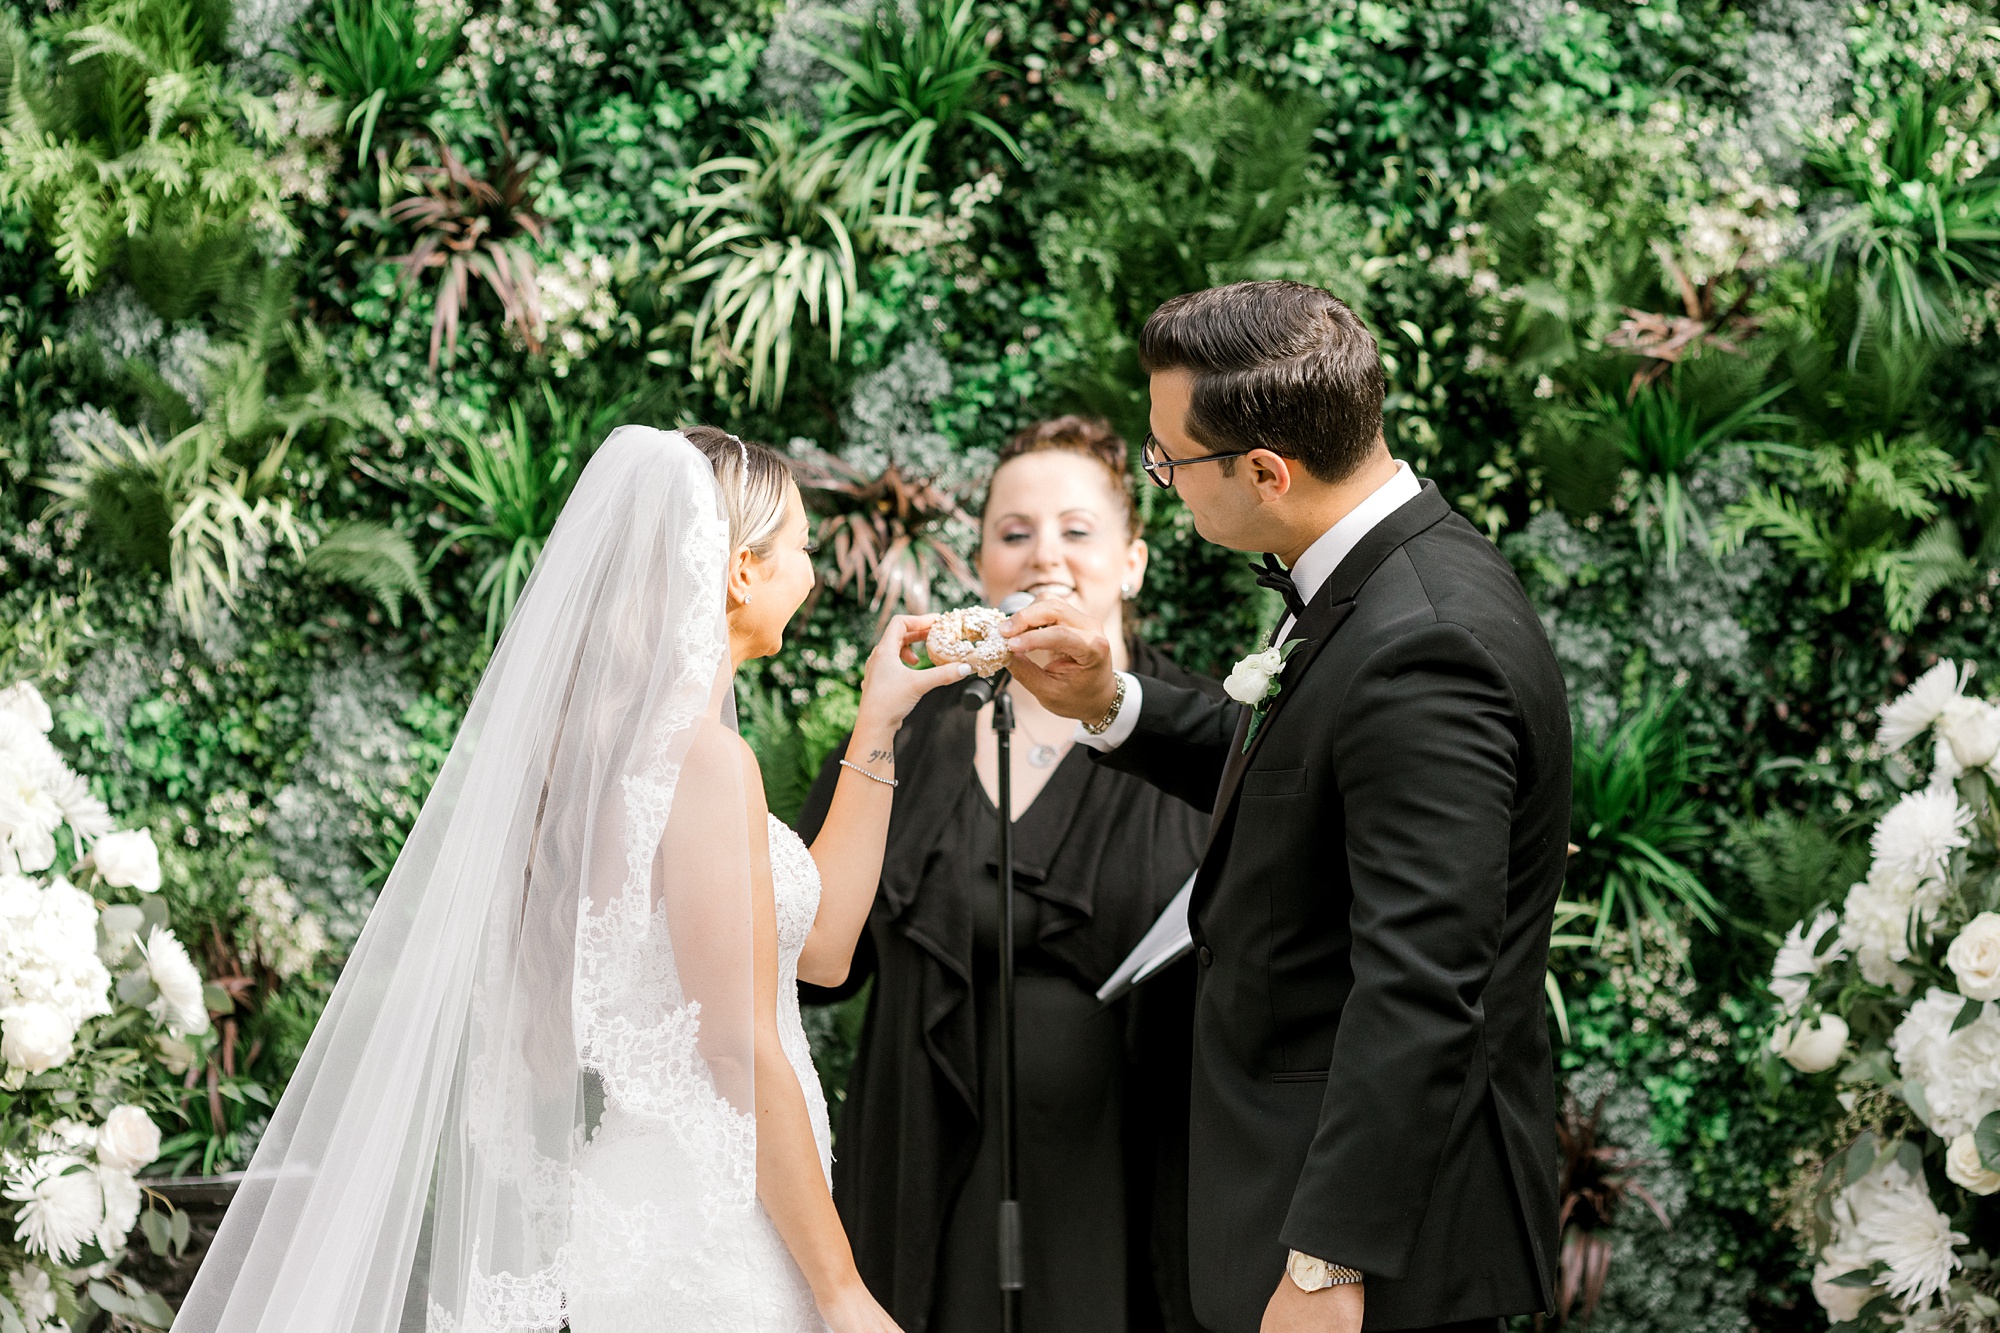 bride and groom share donut during wedding ceremony at The Refinery at Perona Farms